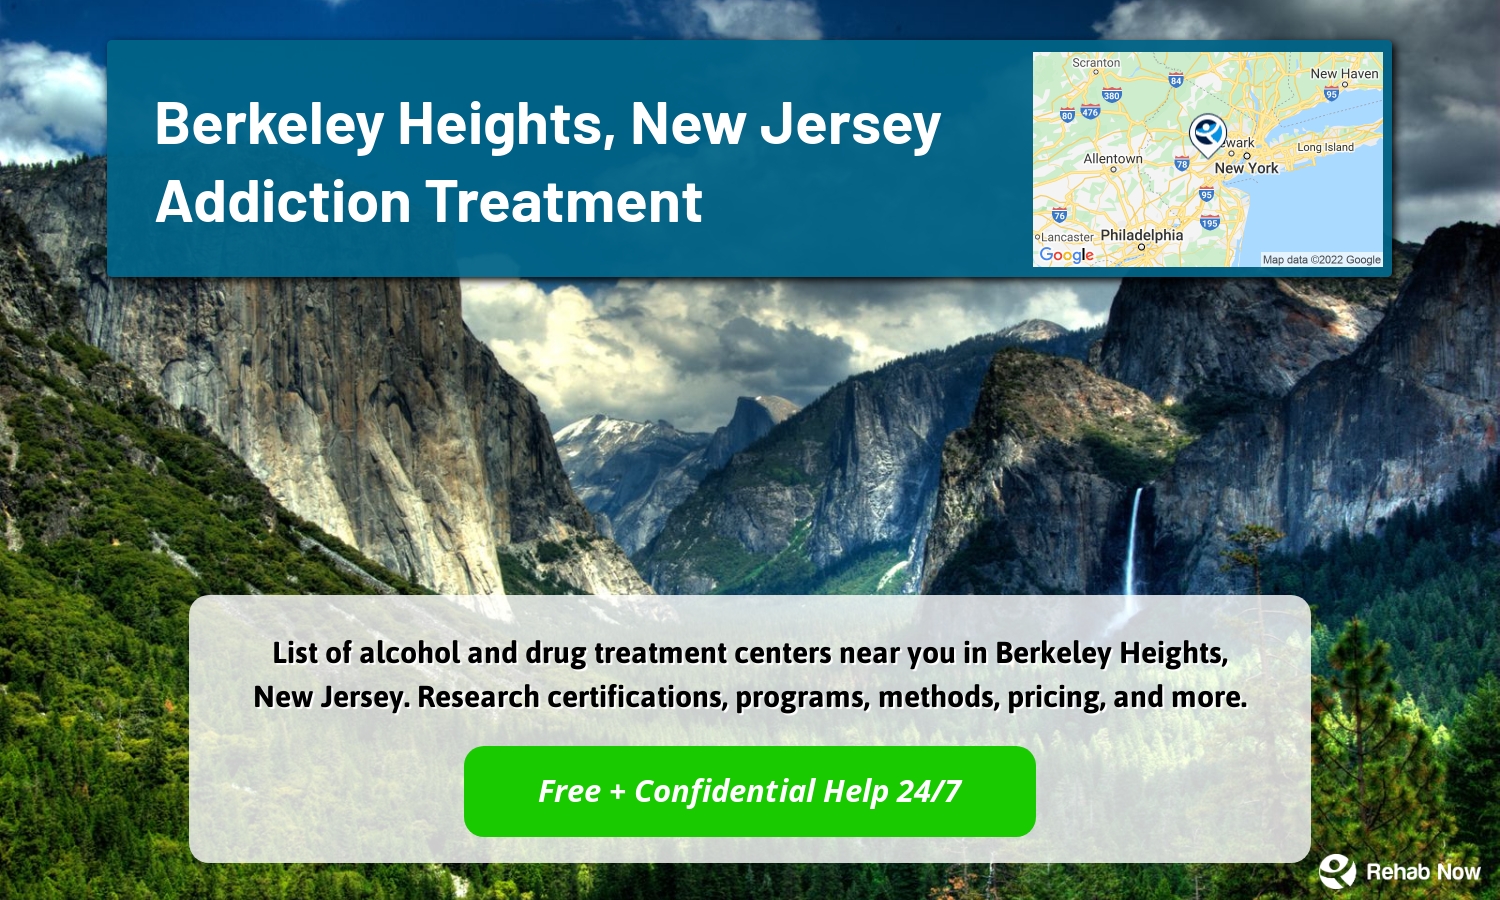 List of alcohol and drug treatment centers near you in Berkeley Heights, New Jersey. Research certifications, programs, methods, pricing, and more.